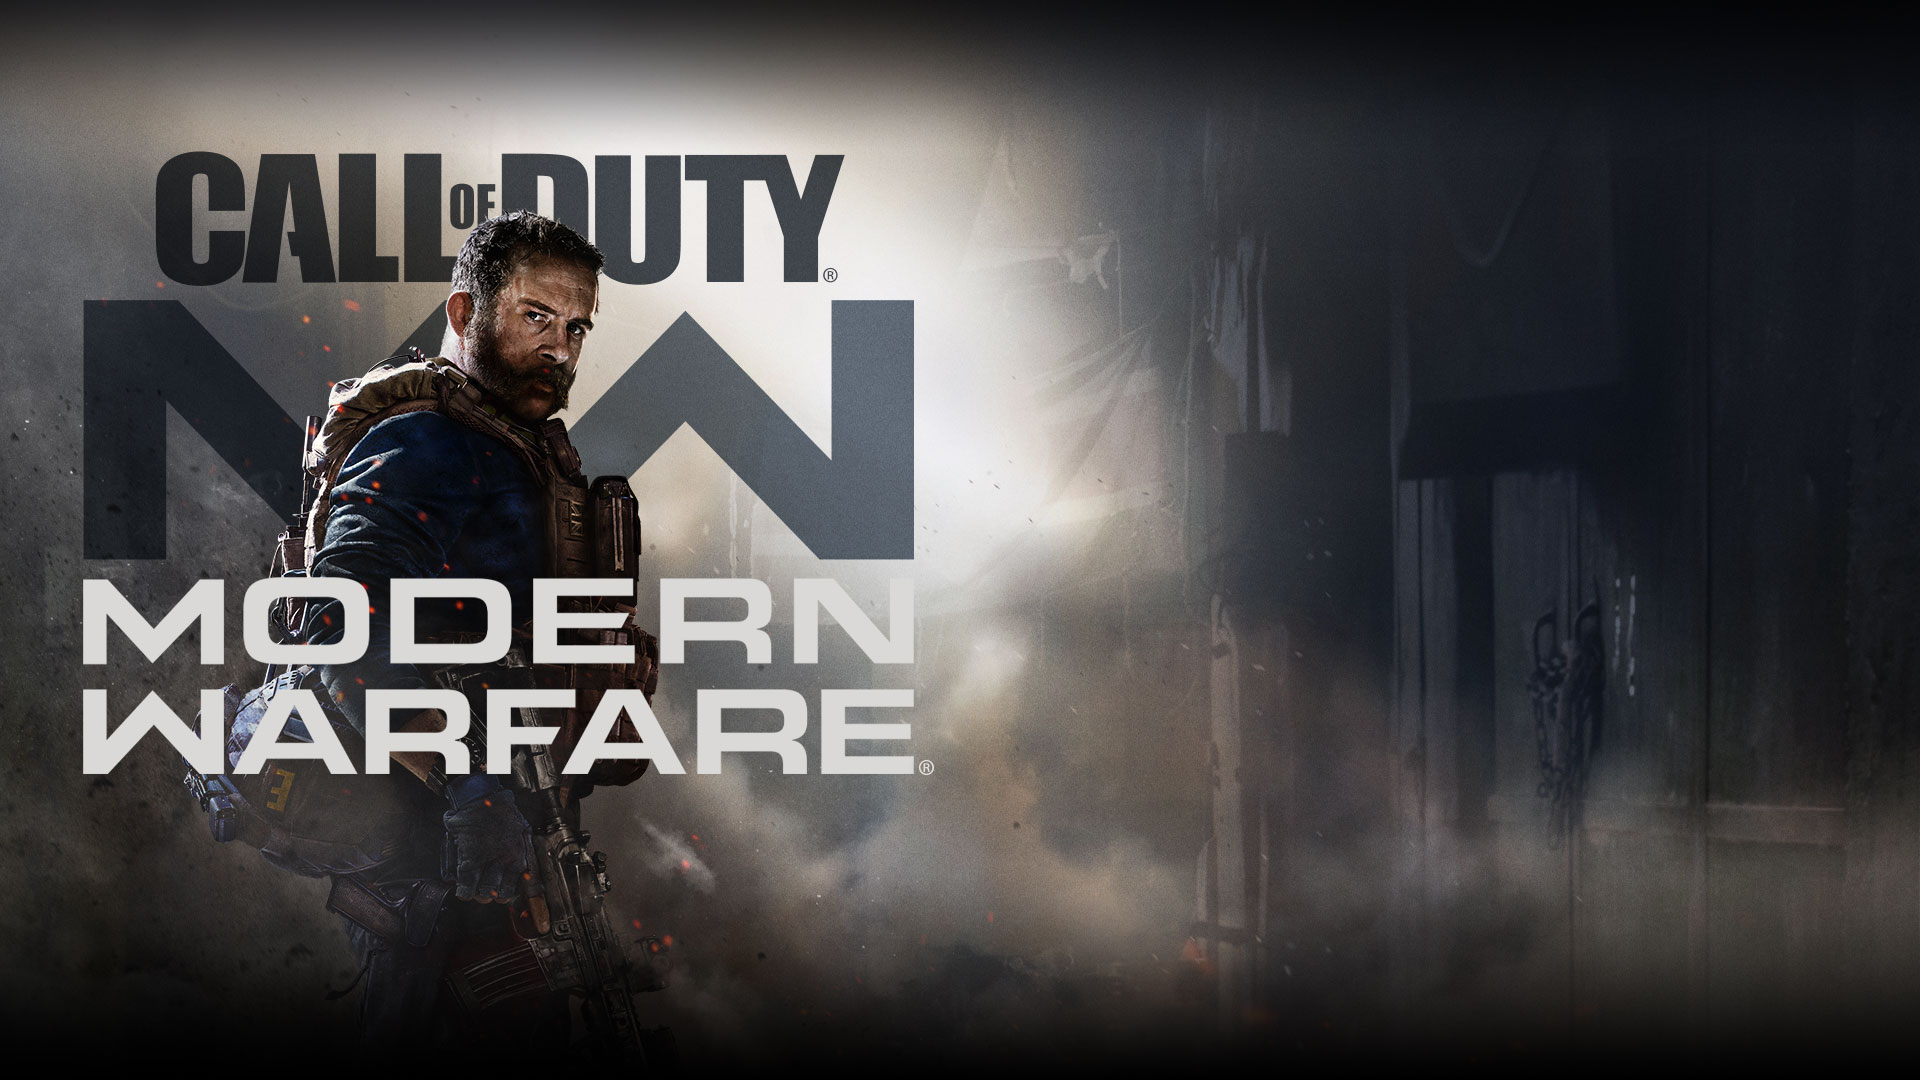 Call of Duty: Modern Warfare logo with character Captain Price in blue with military vest